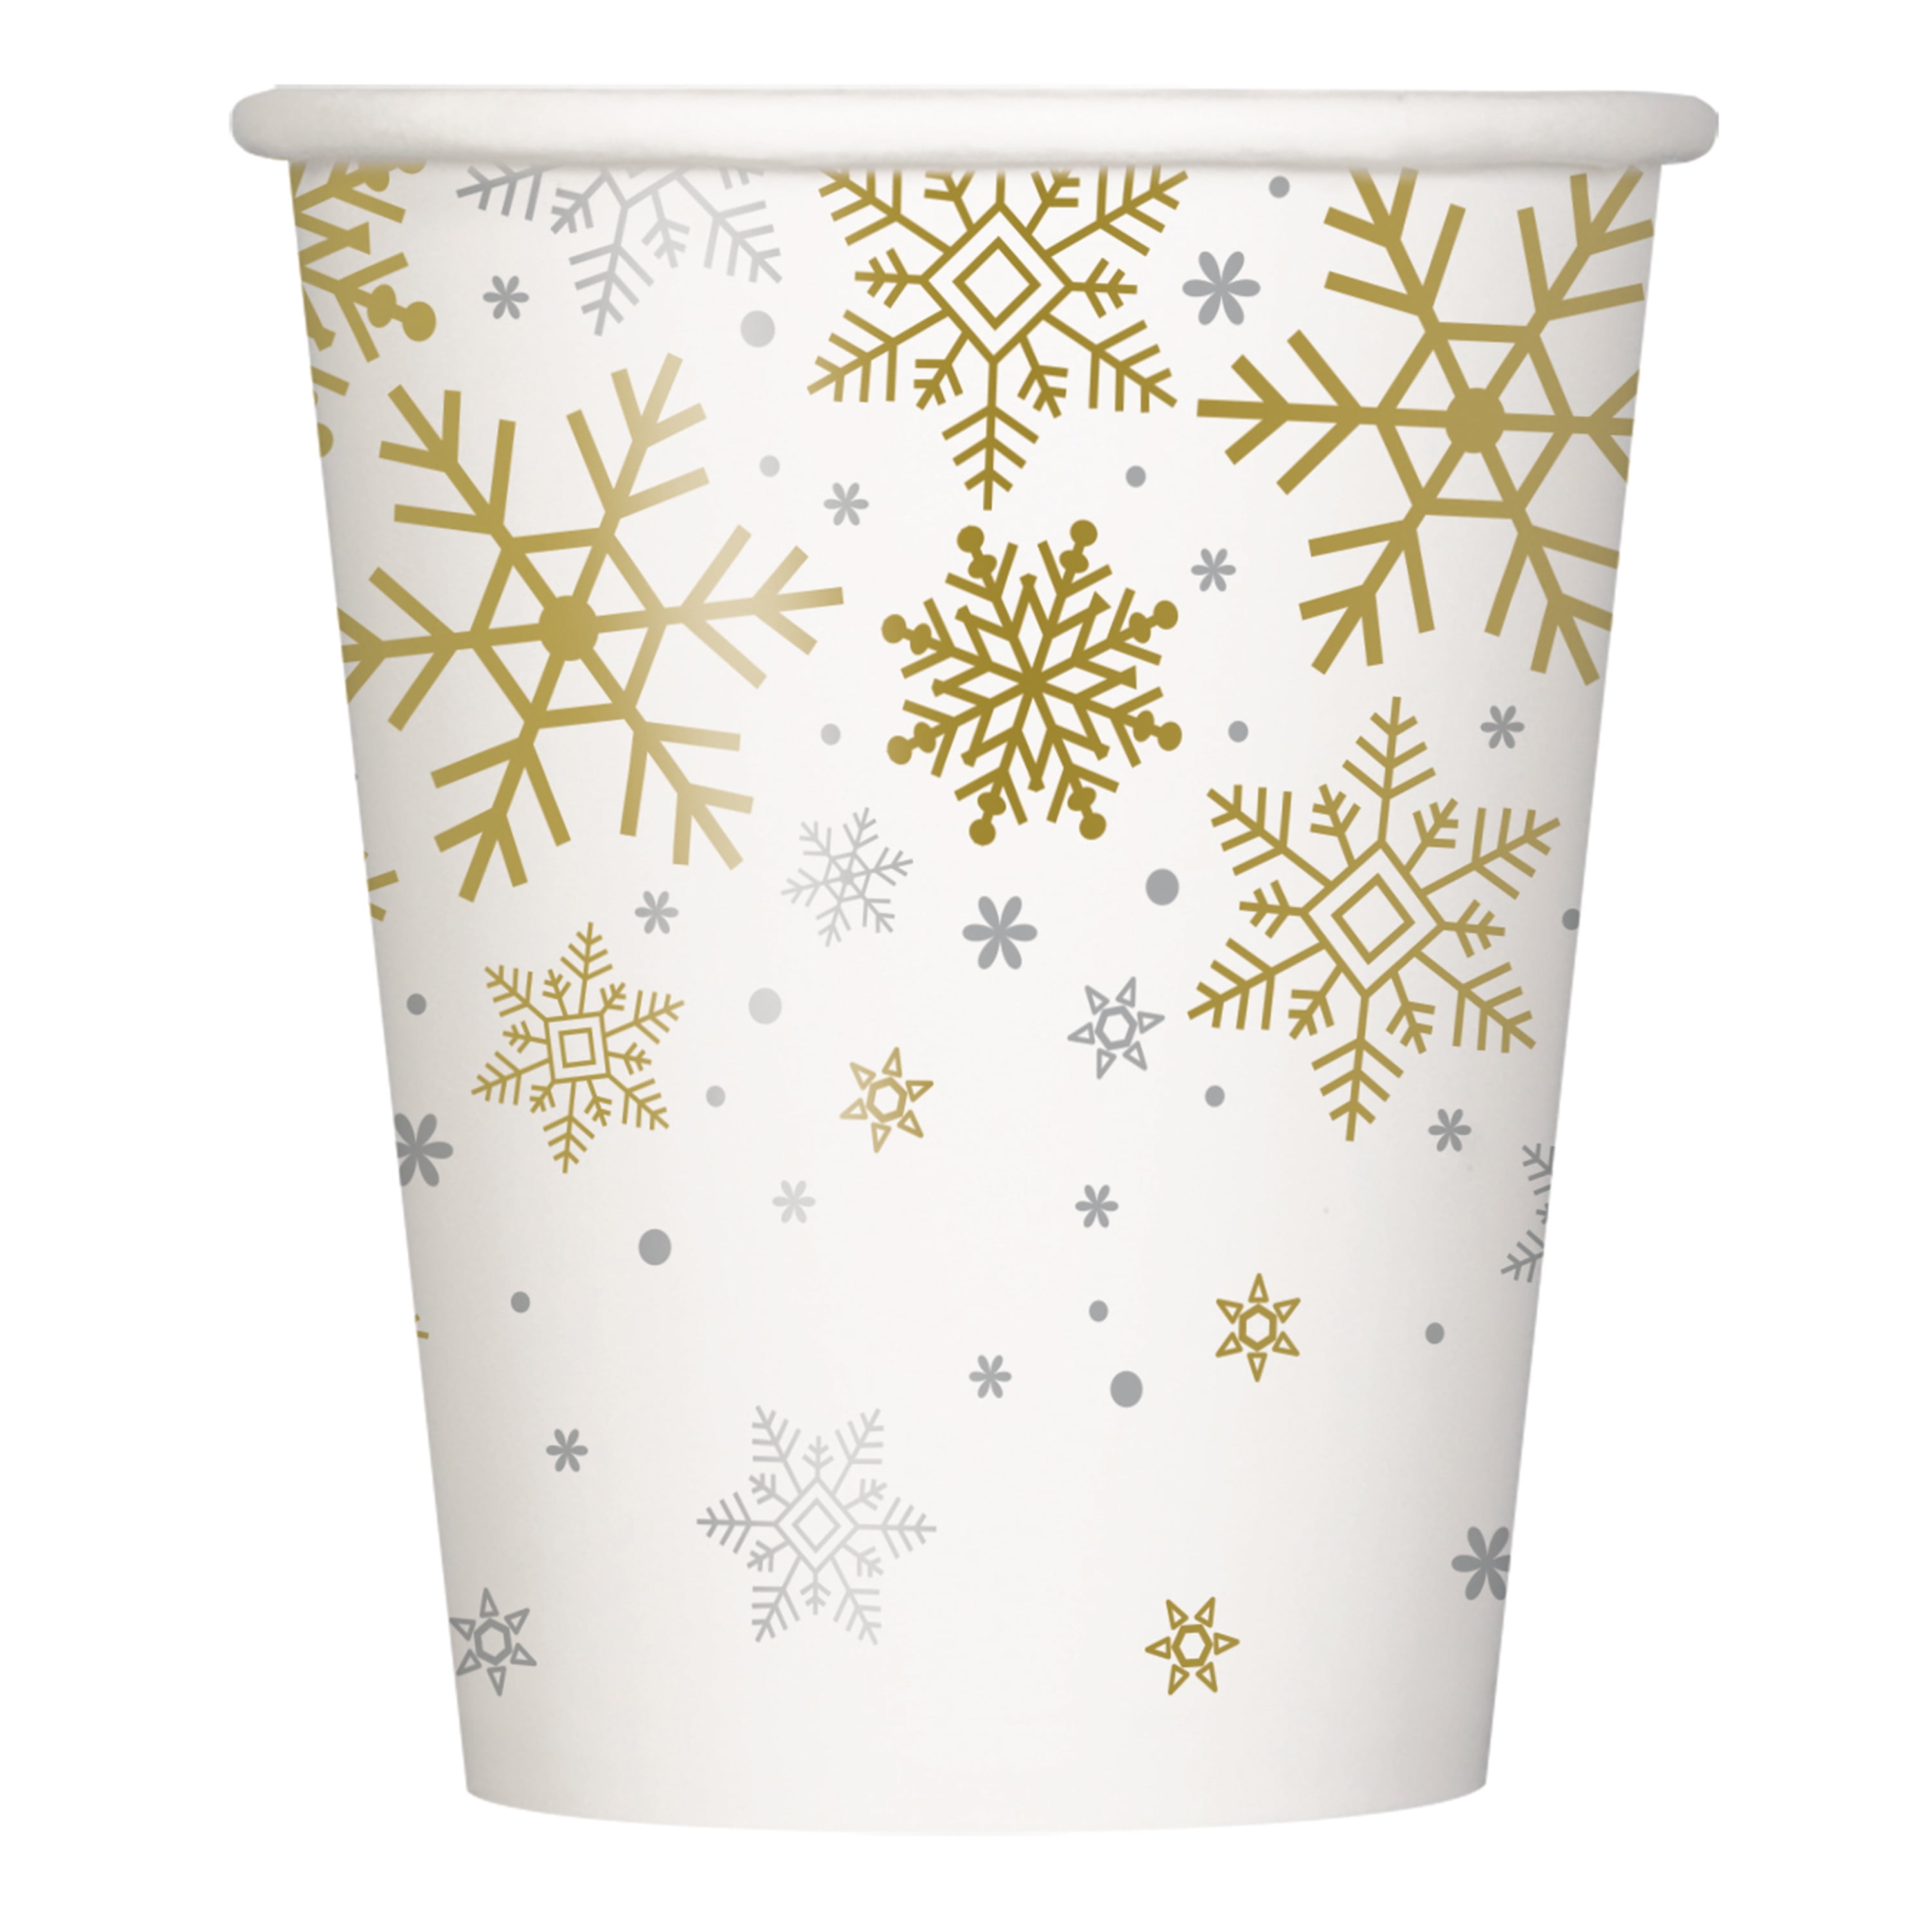 Glad Everyday Disposable Paper Cups with Holiday Snowflake Silver & Gold  Design | Heavy Duty Paper C…See more Glad Everyday Disposable Paper Cups  with